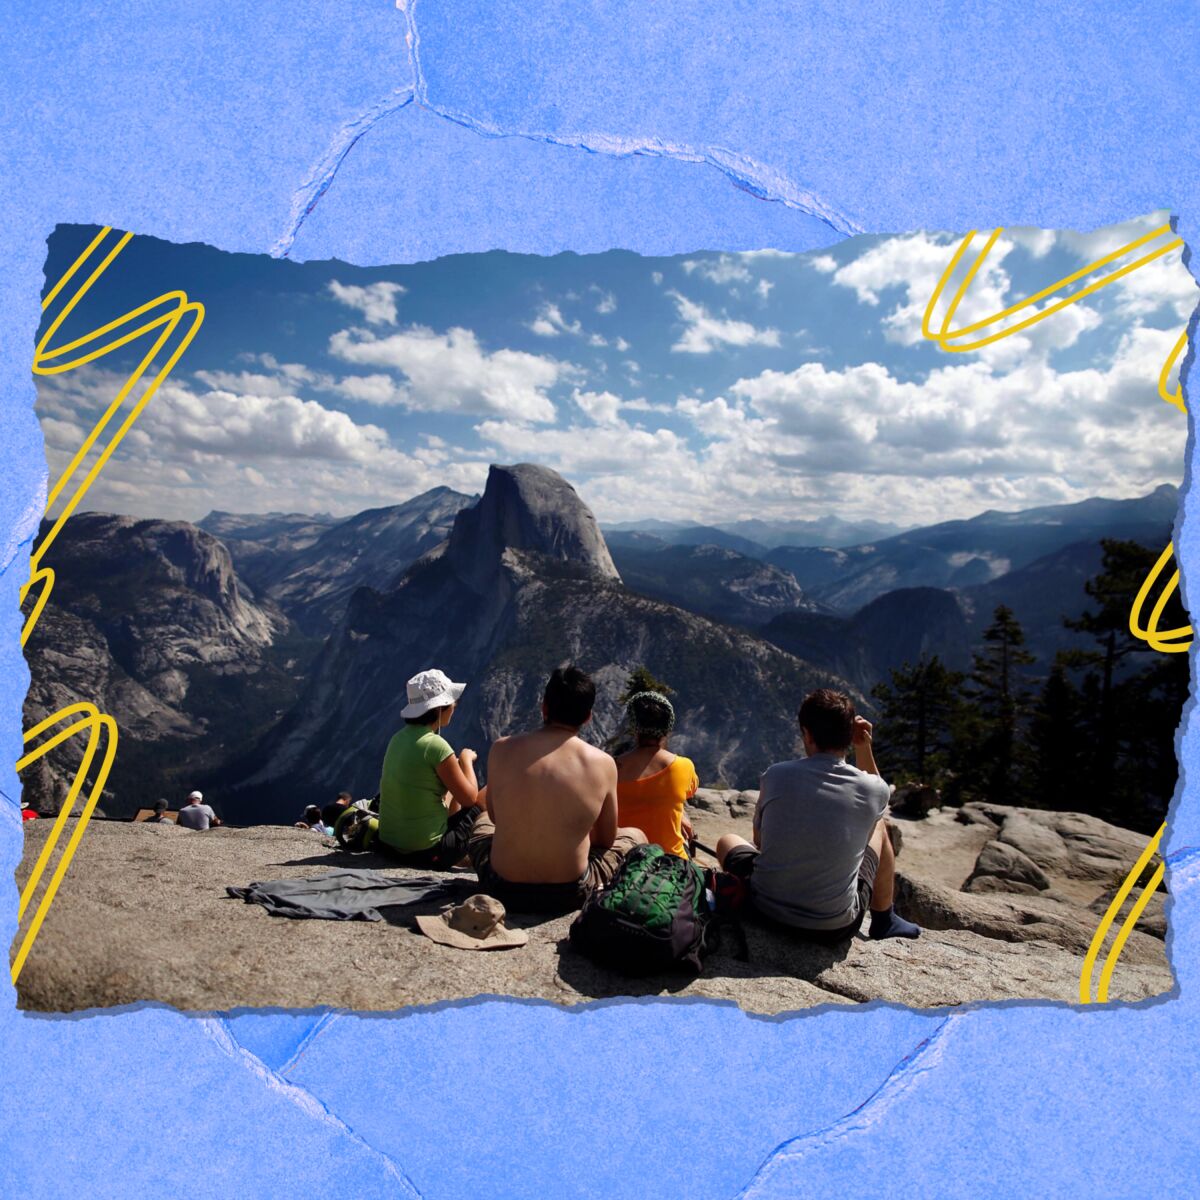 Visitors enjoy the grand view at Glacier Point in Yosemite National Park.